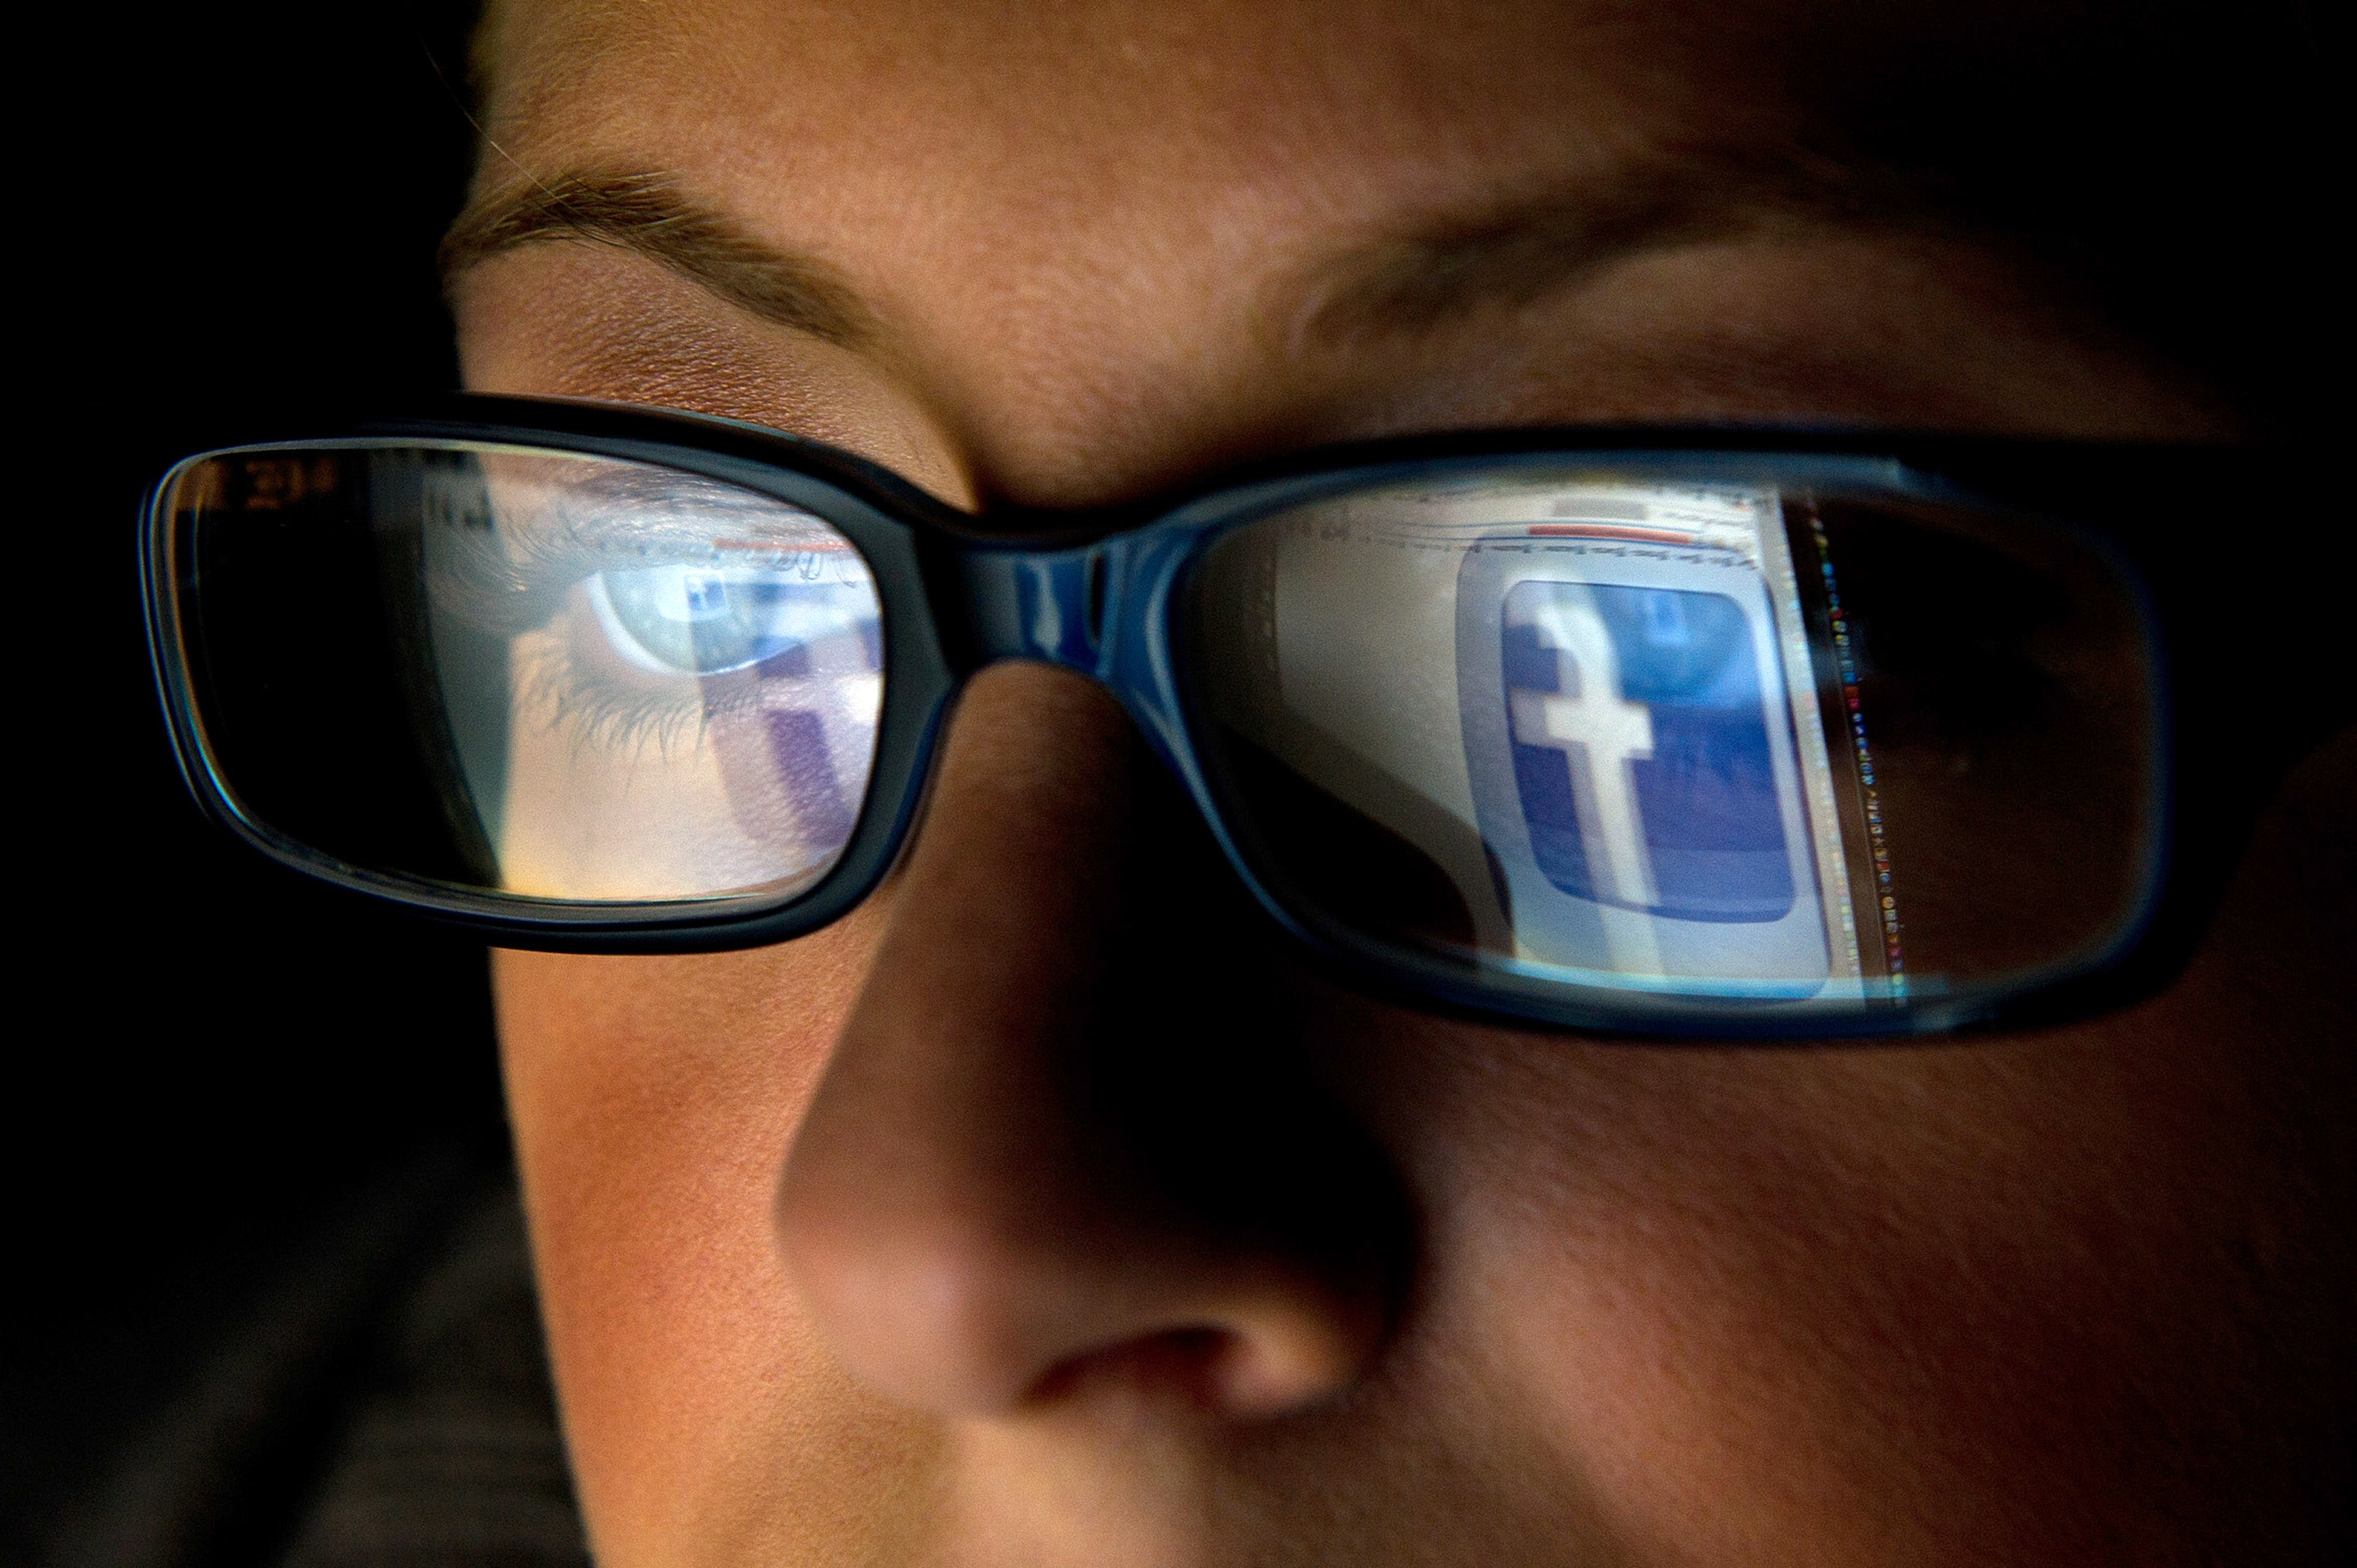 Facebook Privacy Flaw Exposes Private Photos